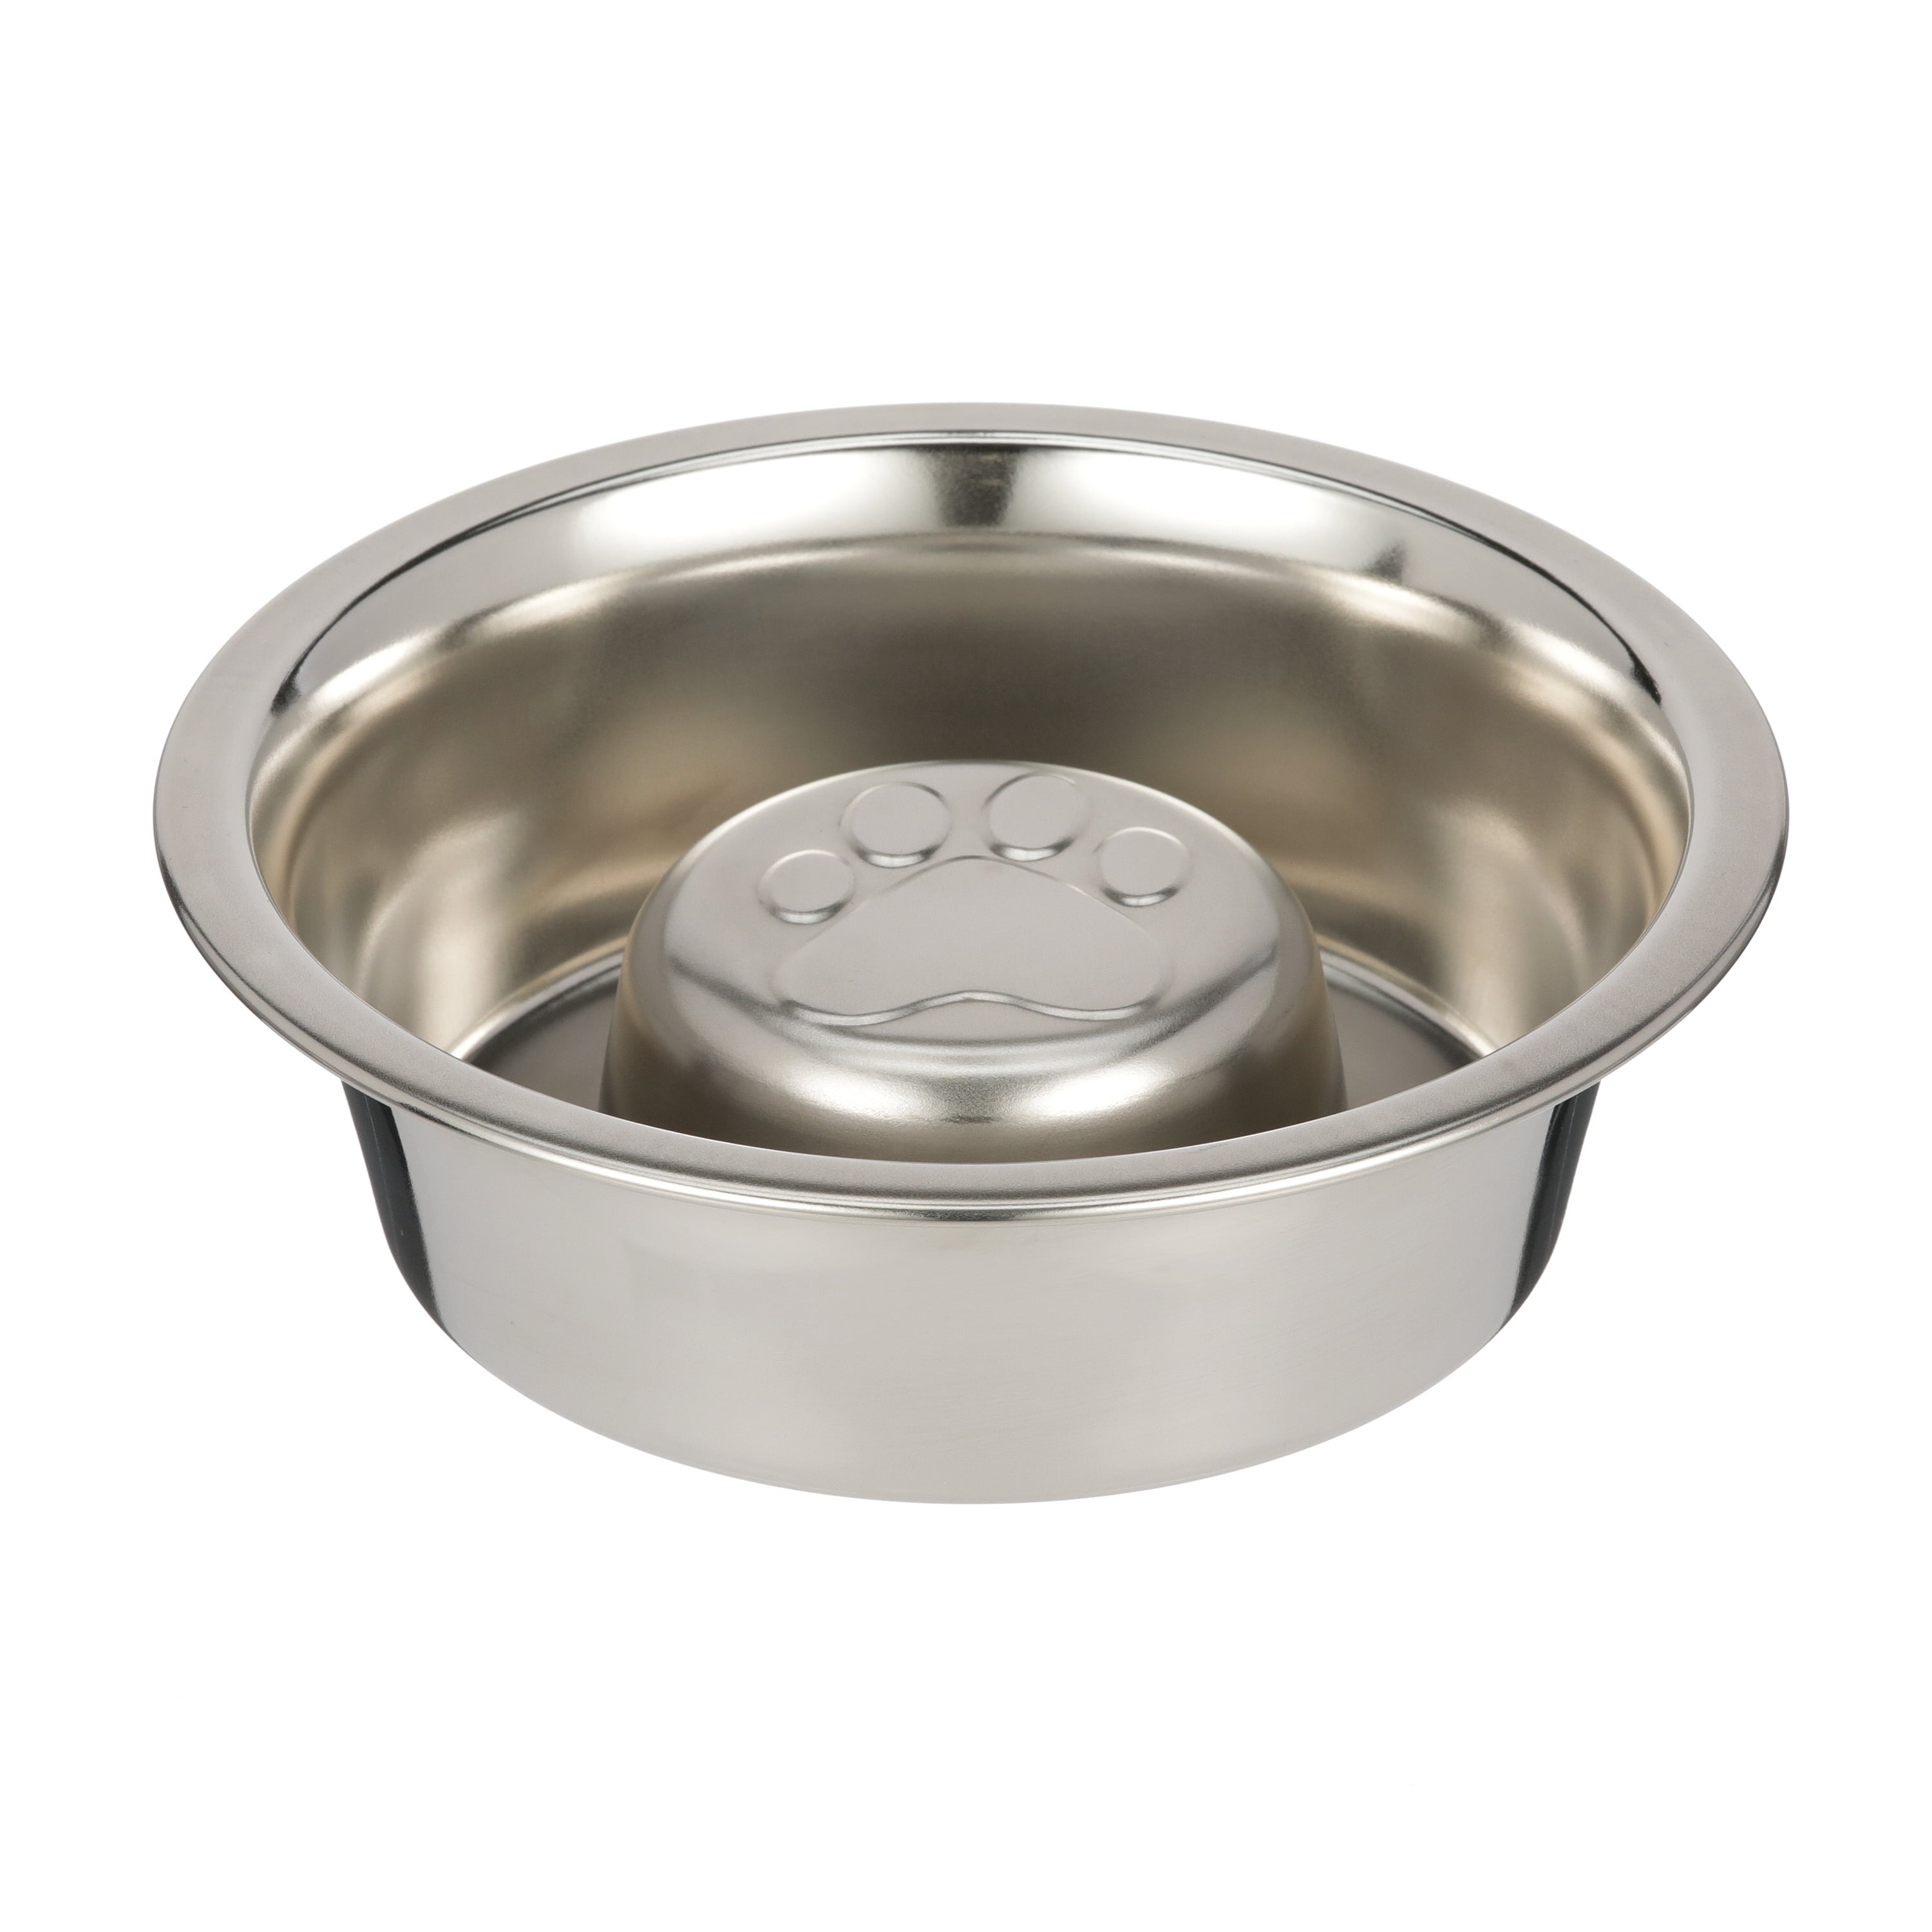 The Niner Slow Feed Bowl - Fits Inside of Select Neater Feeders – Neater  Pets